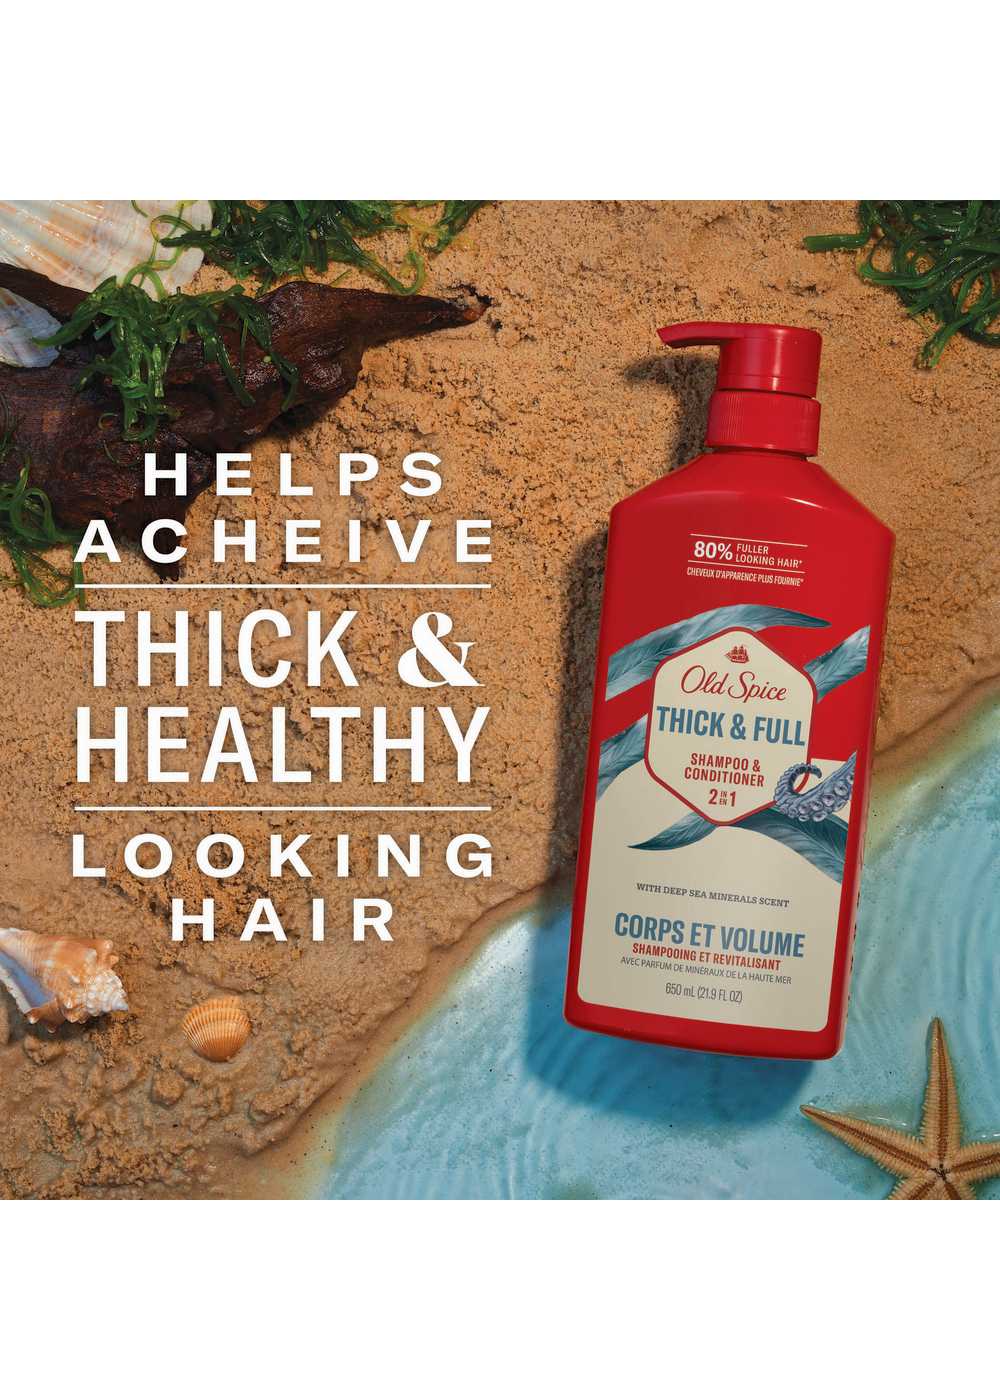 Old Spice Thick & Full 2 in 1 Shampoo & Conditioner - Deep Sea Minerals Scent; image 3 of 7